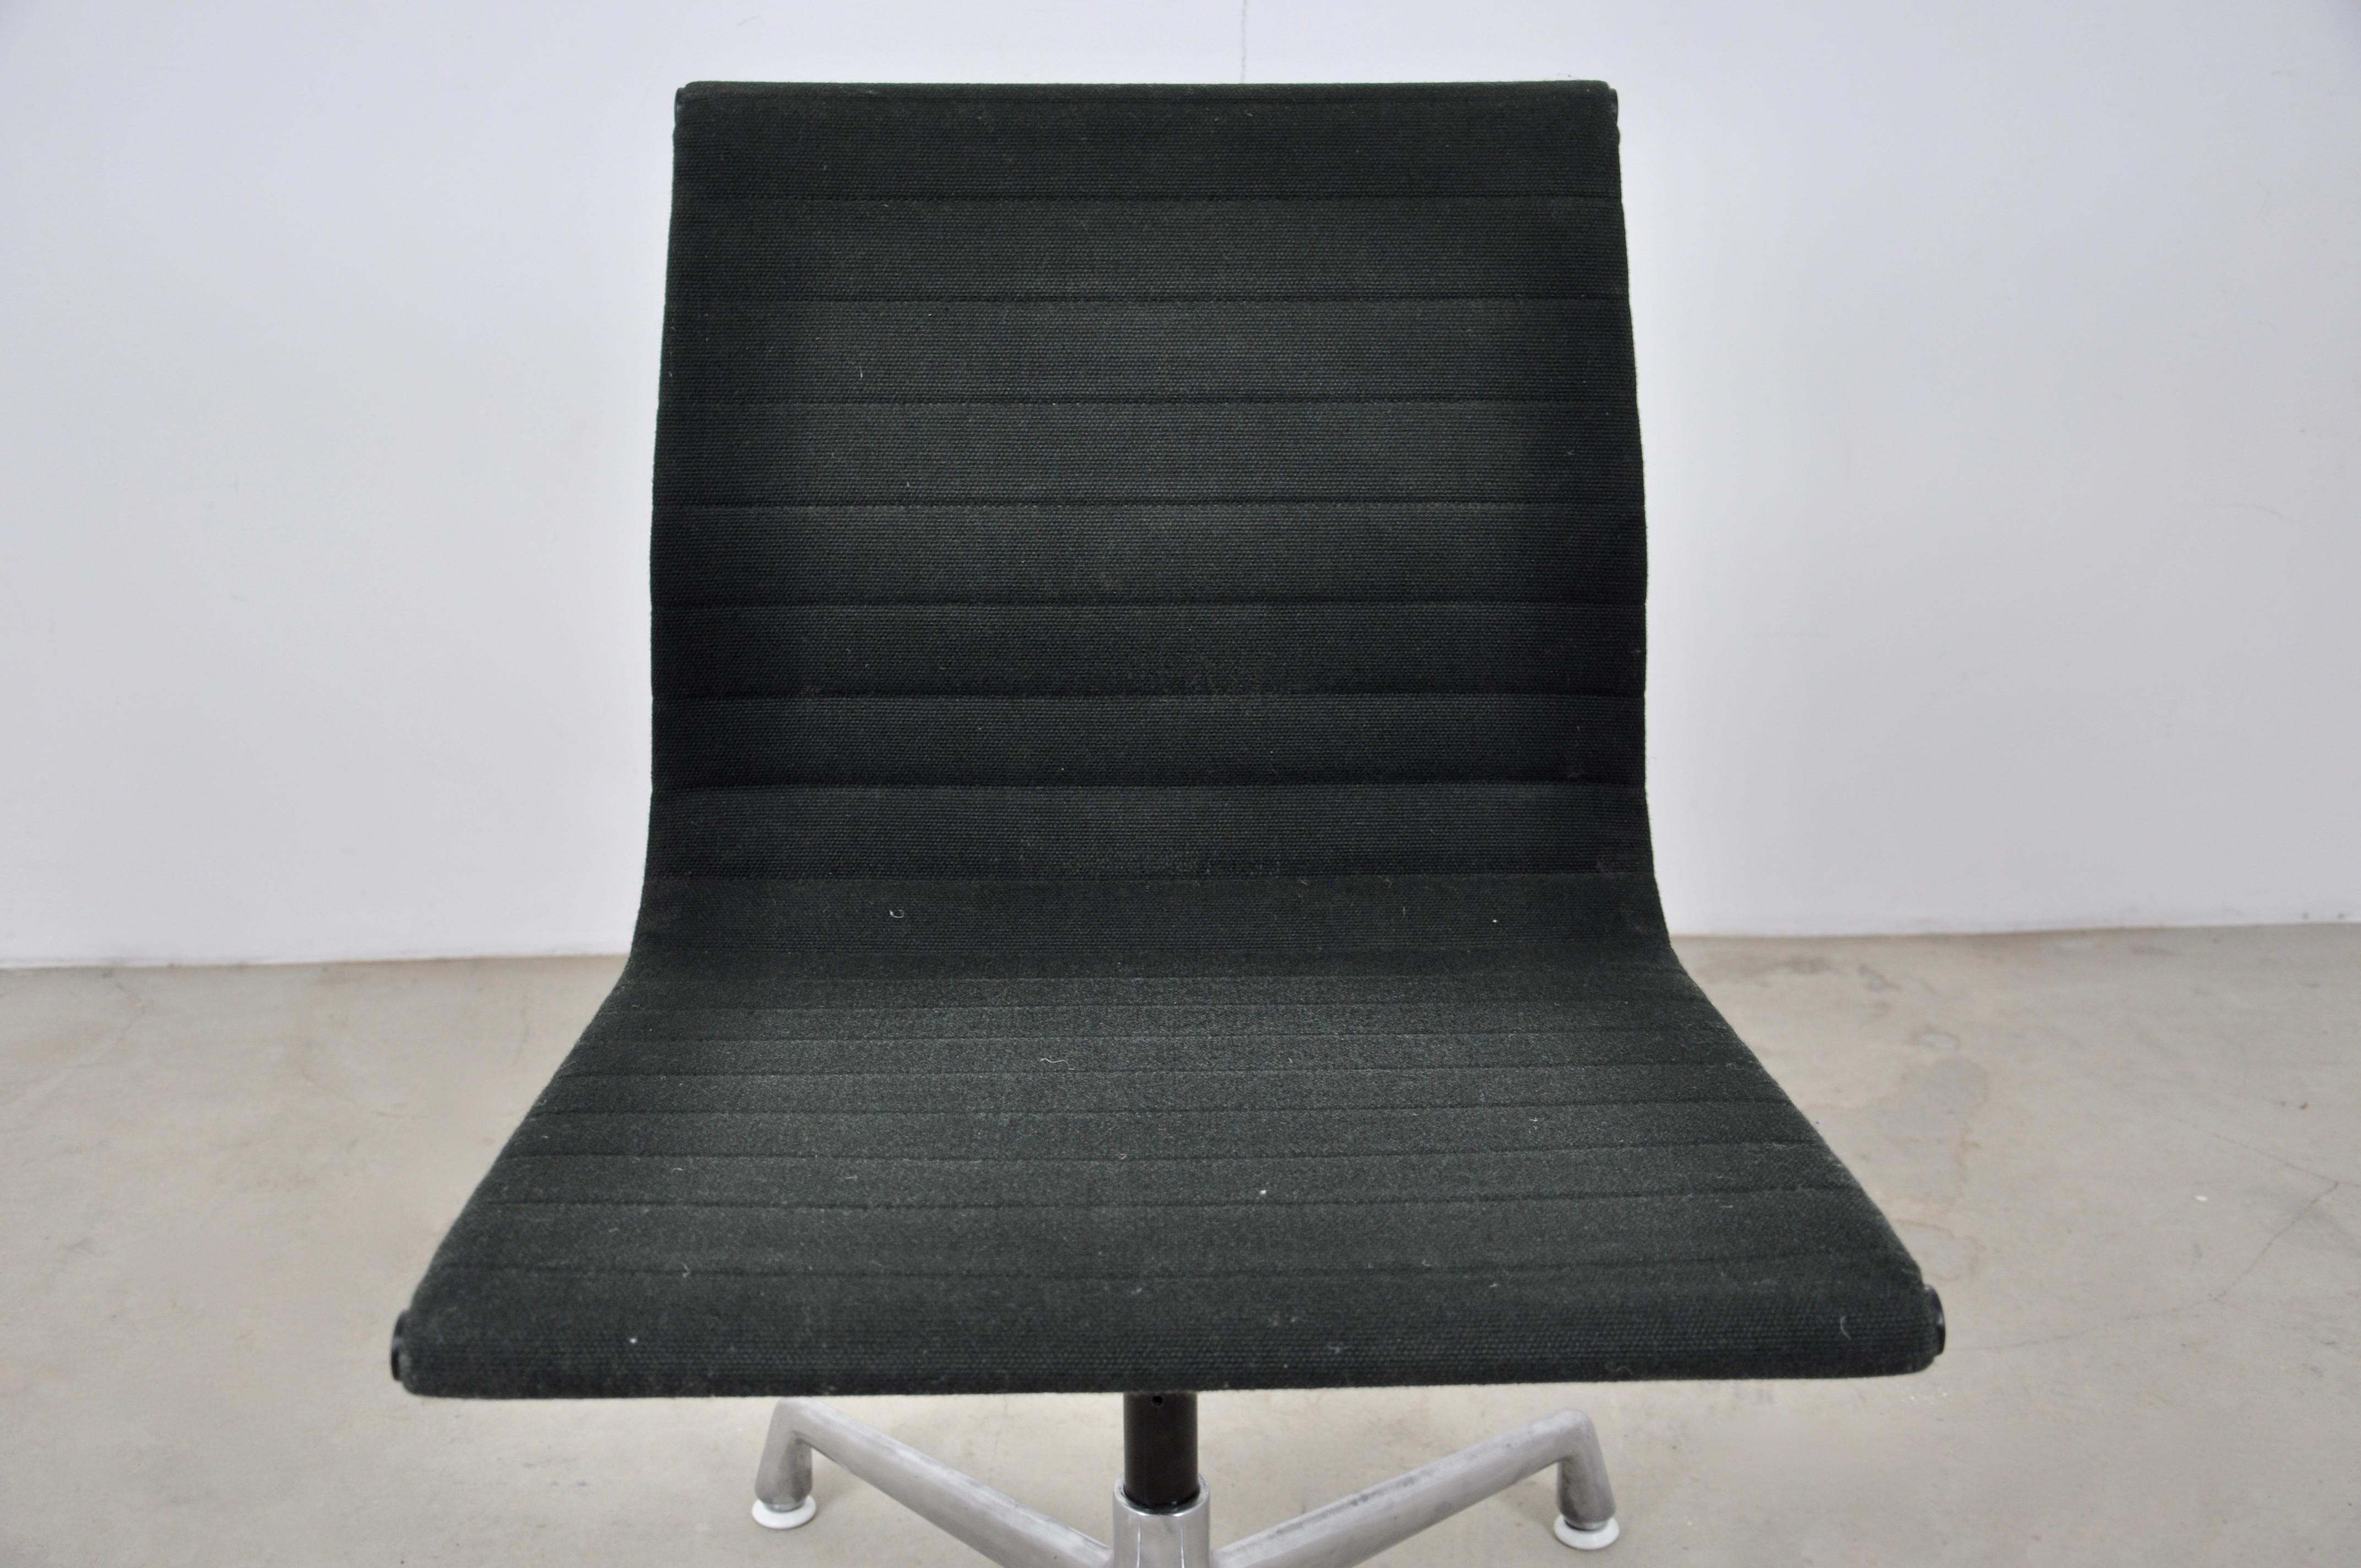 Aluminum Black Office chair by Charles &Ray Eames for Herman Miller, 1960s For Sale